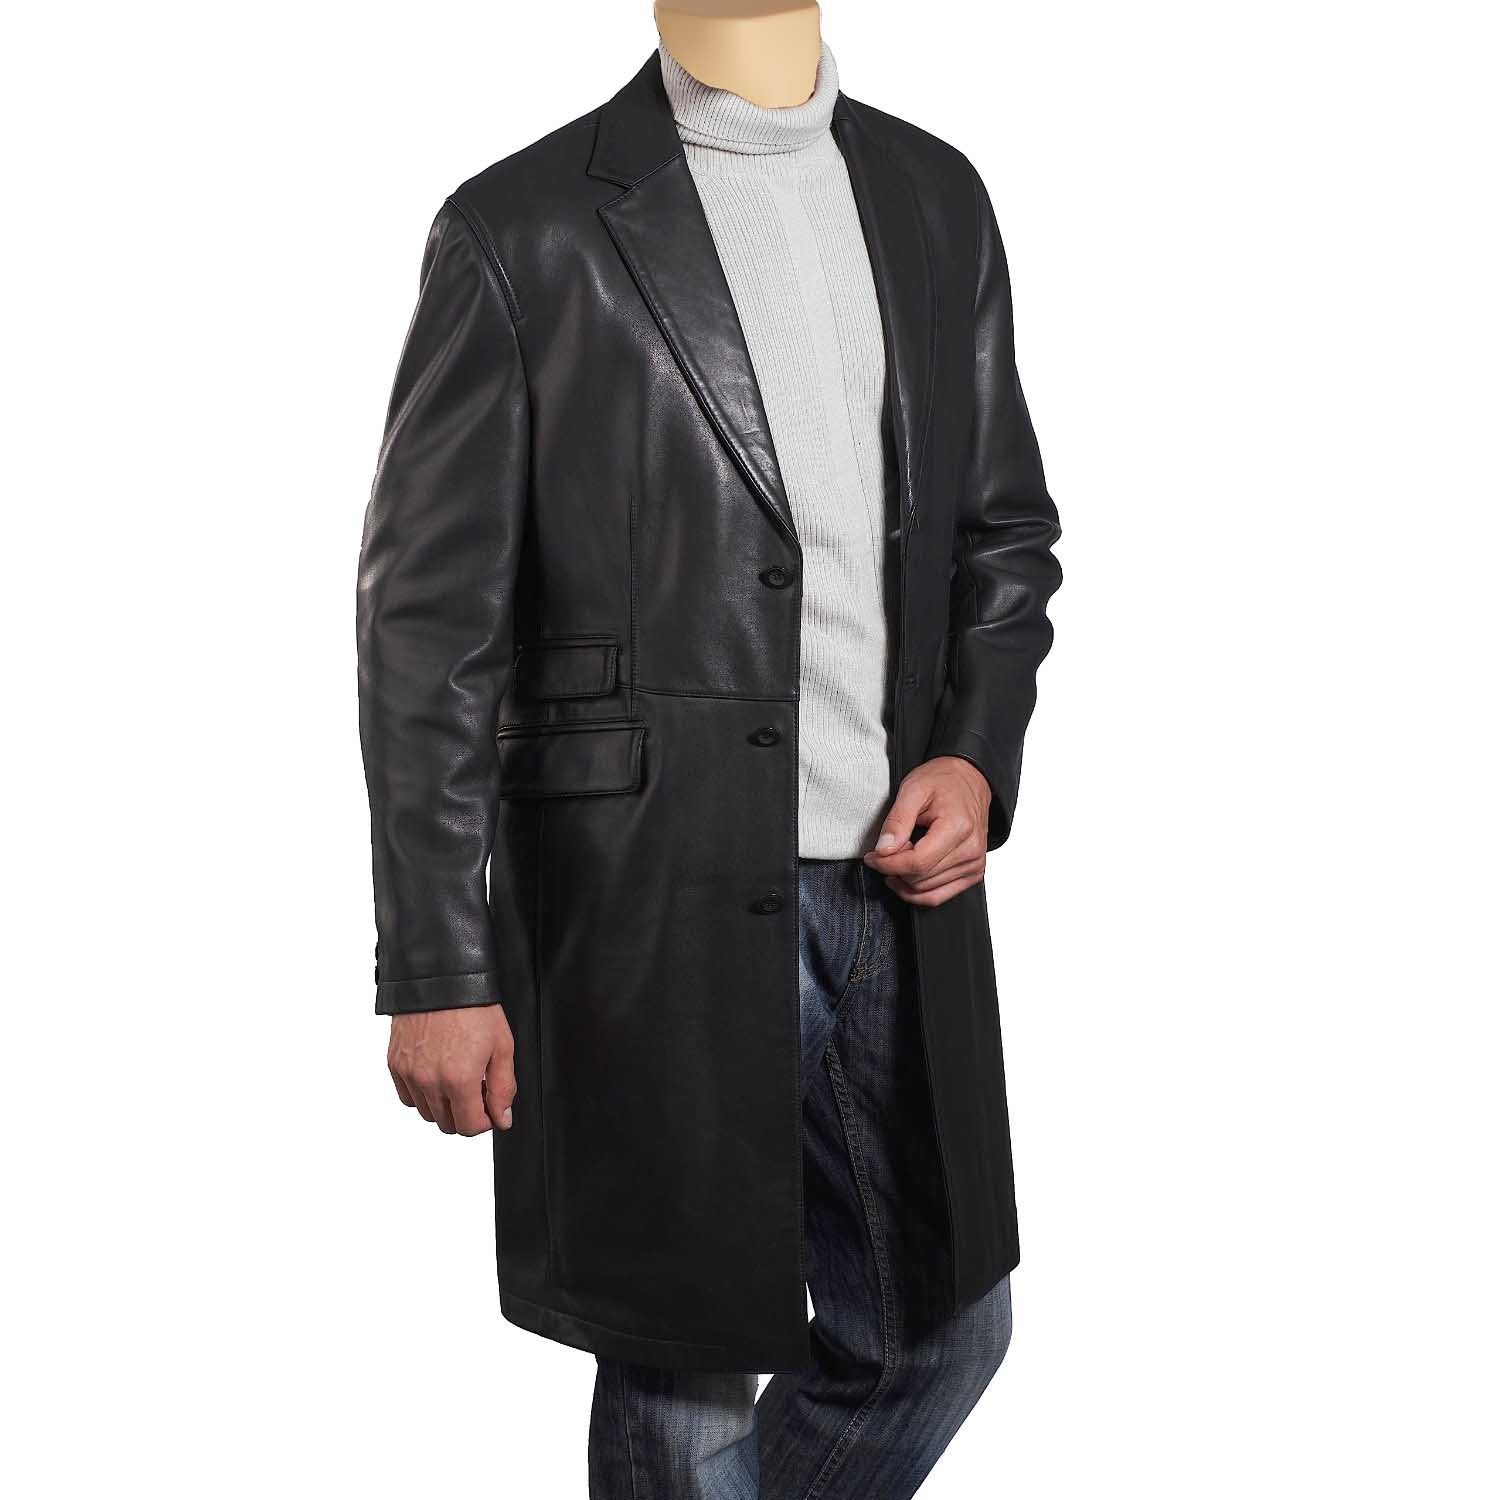 Black Leather 3/4 Length trench Coat, Leather Jacket – Lusso Leather